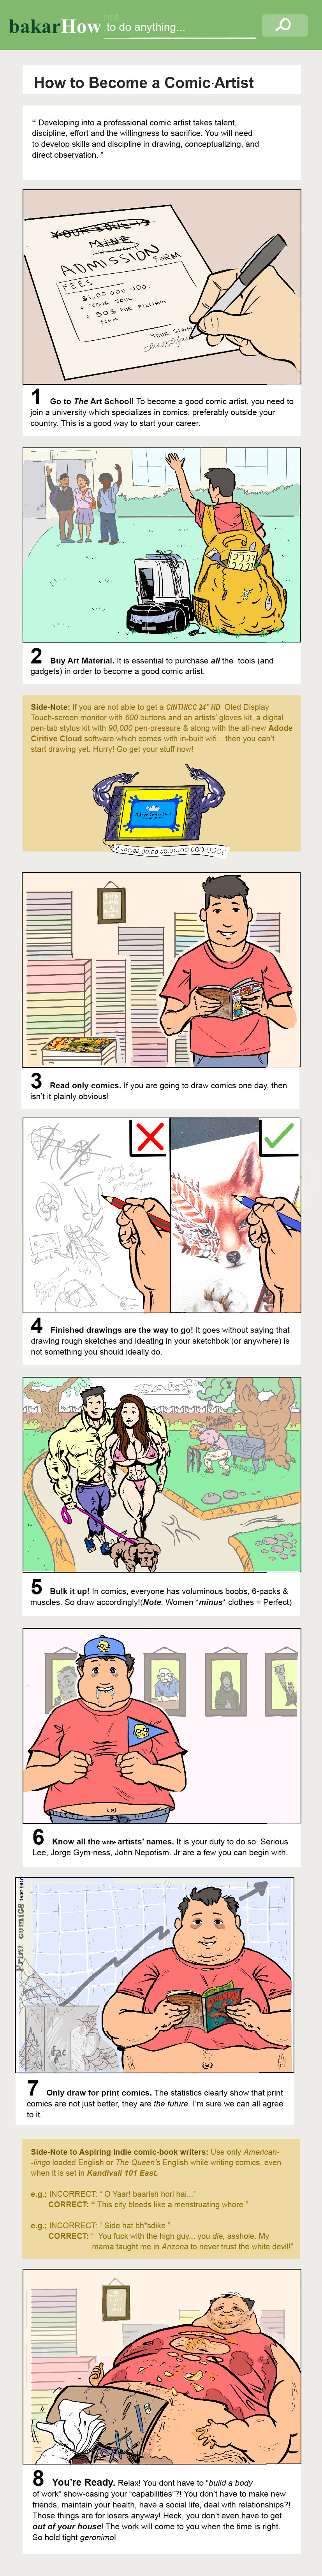 How to become a comic artist